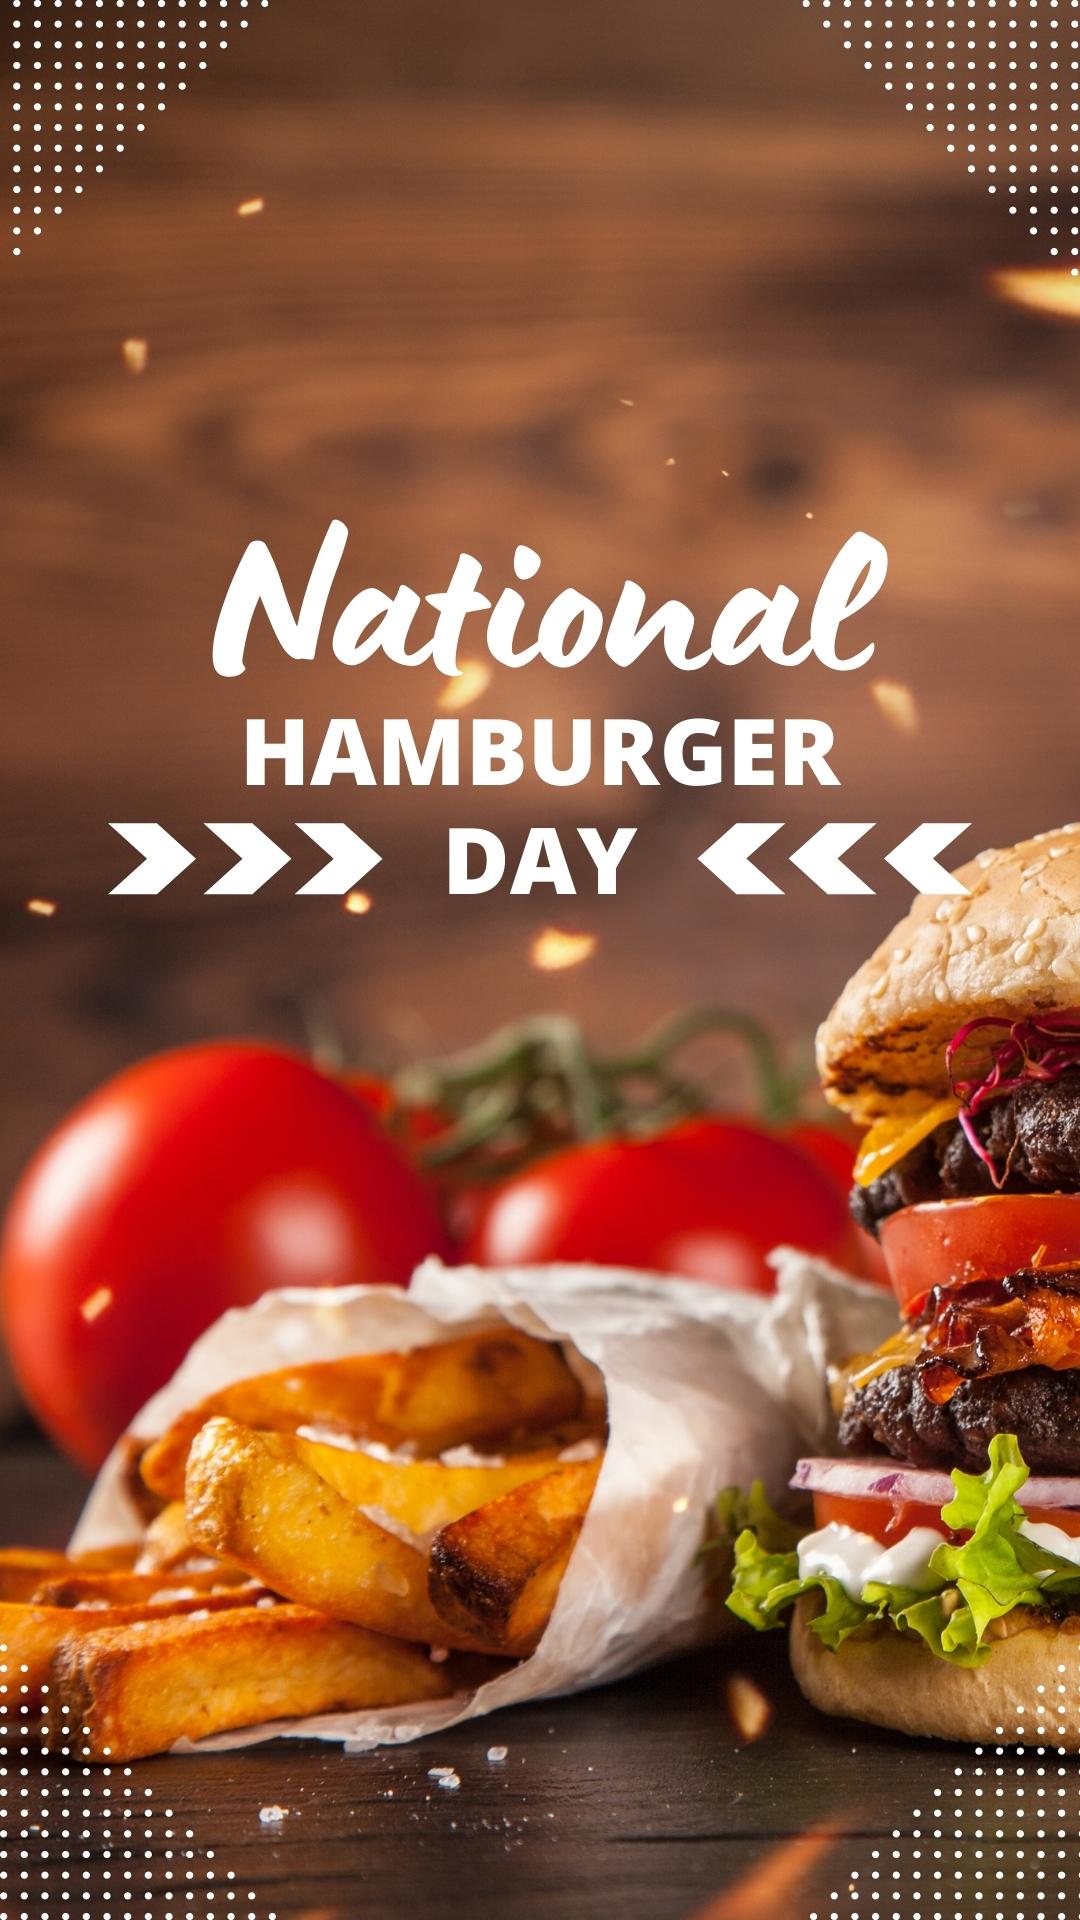 best national hamburger day wishes images for instagram post (38)